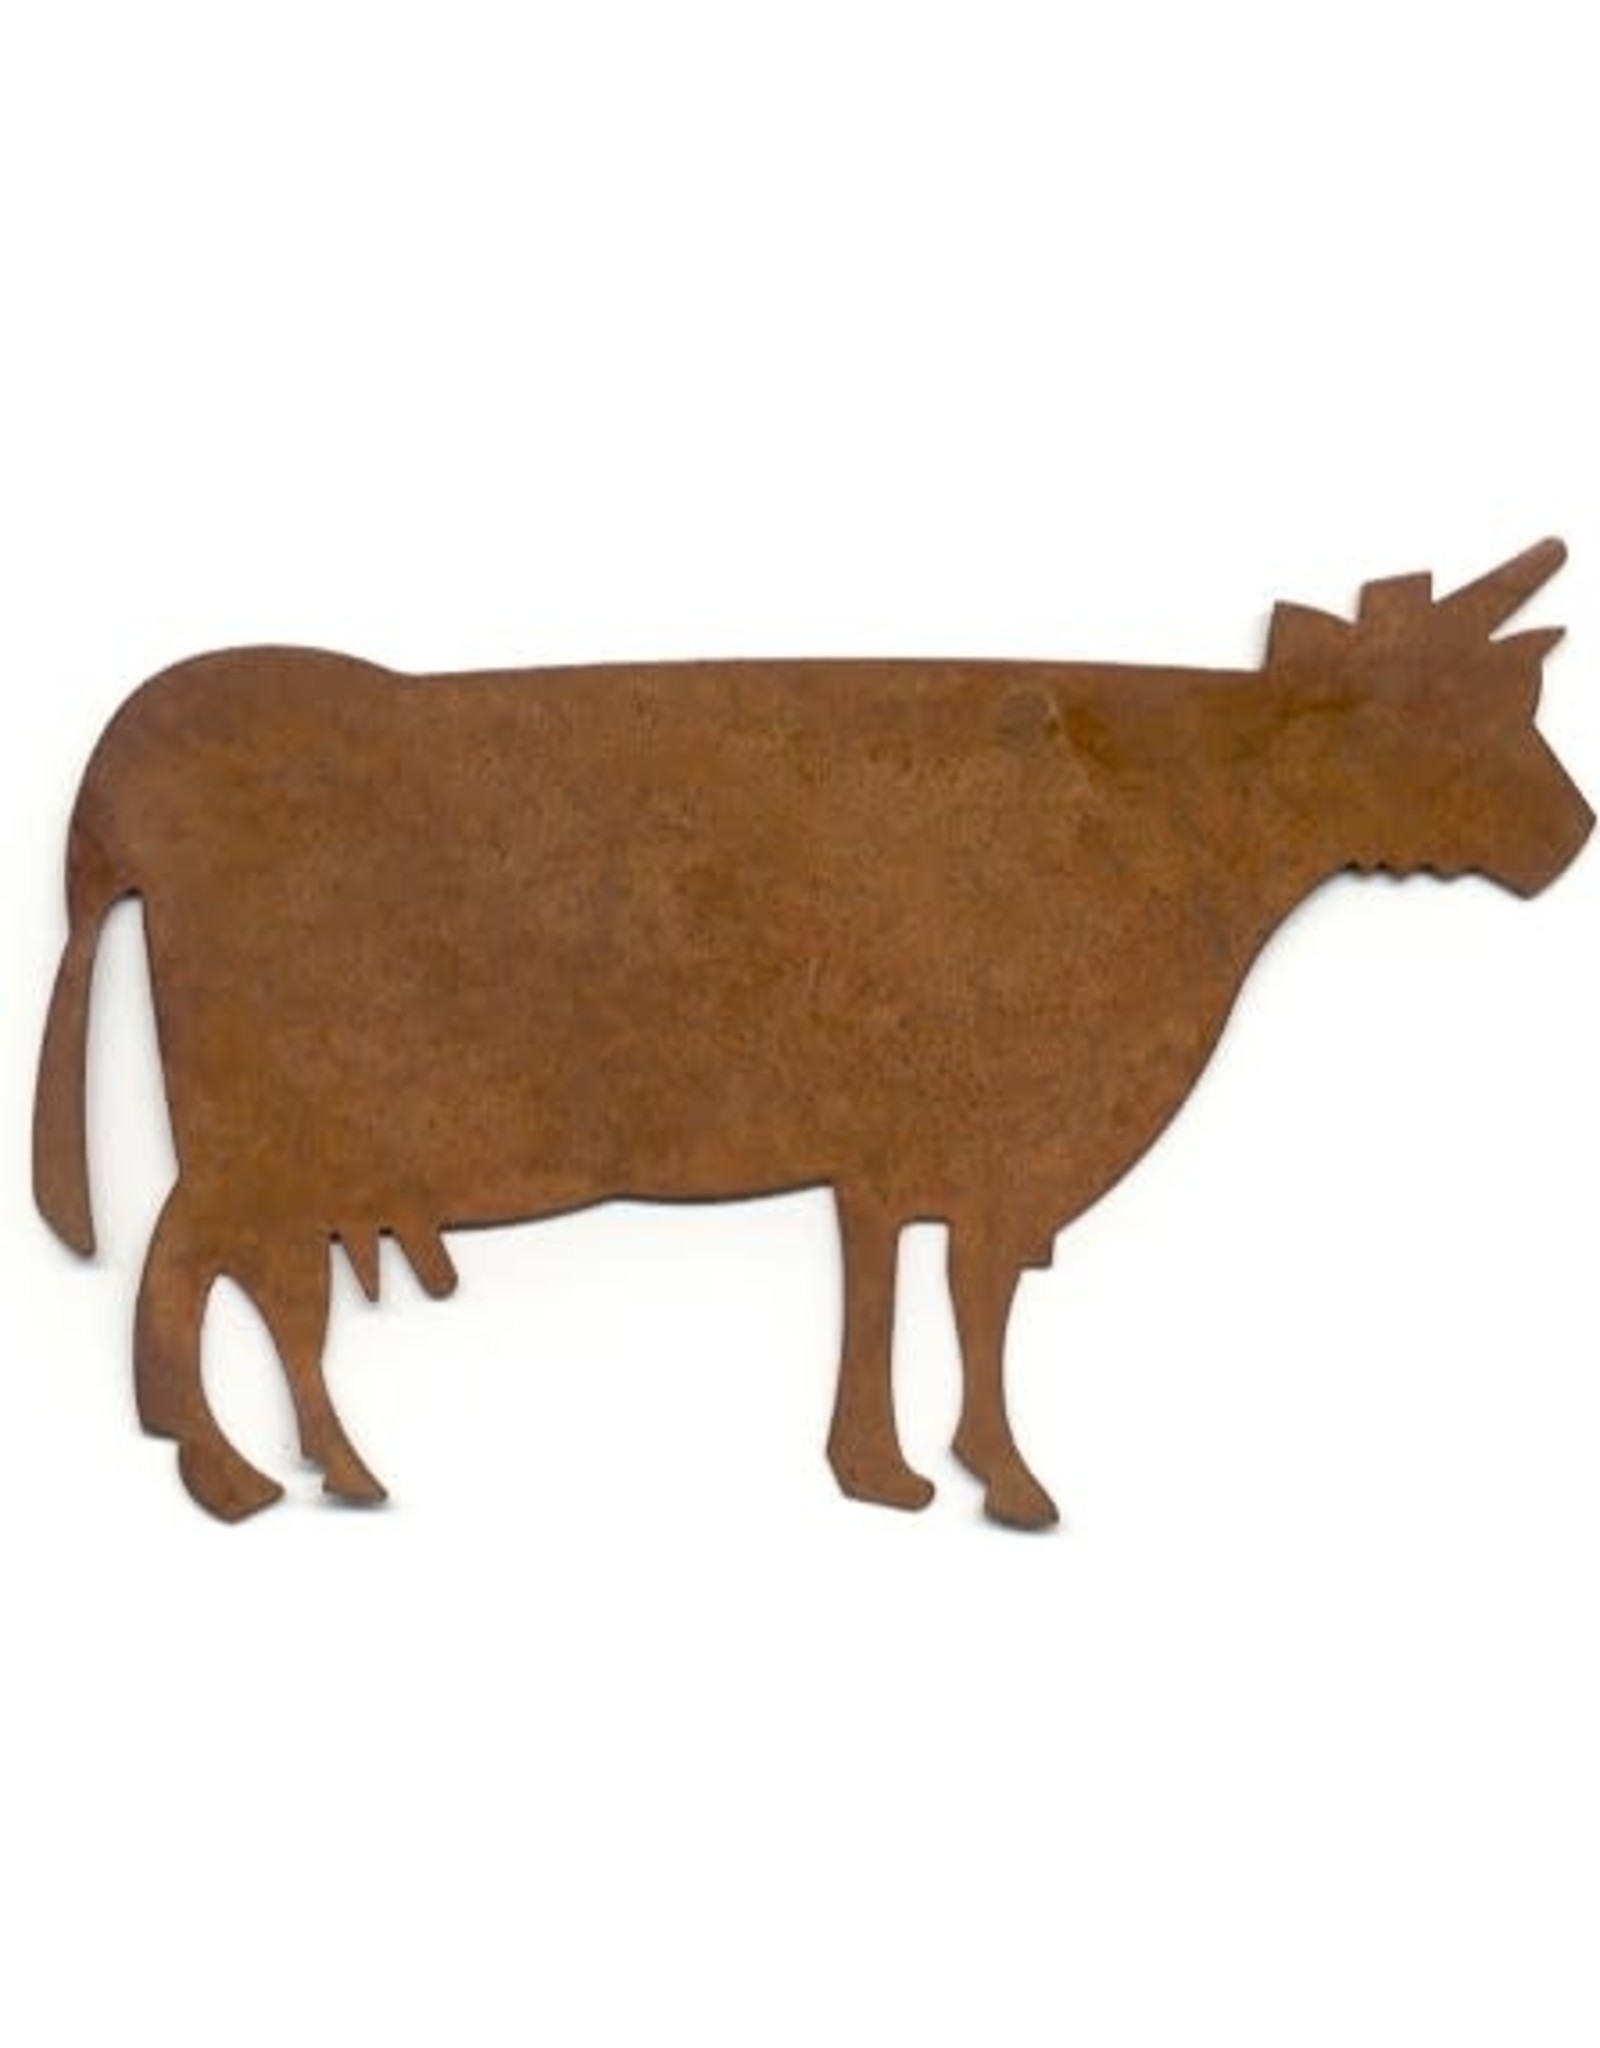 RUSTY TIN COW 4 5/16" (NO HOLE) PACKAGED 12